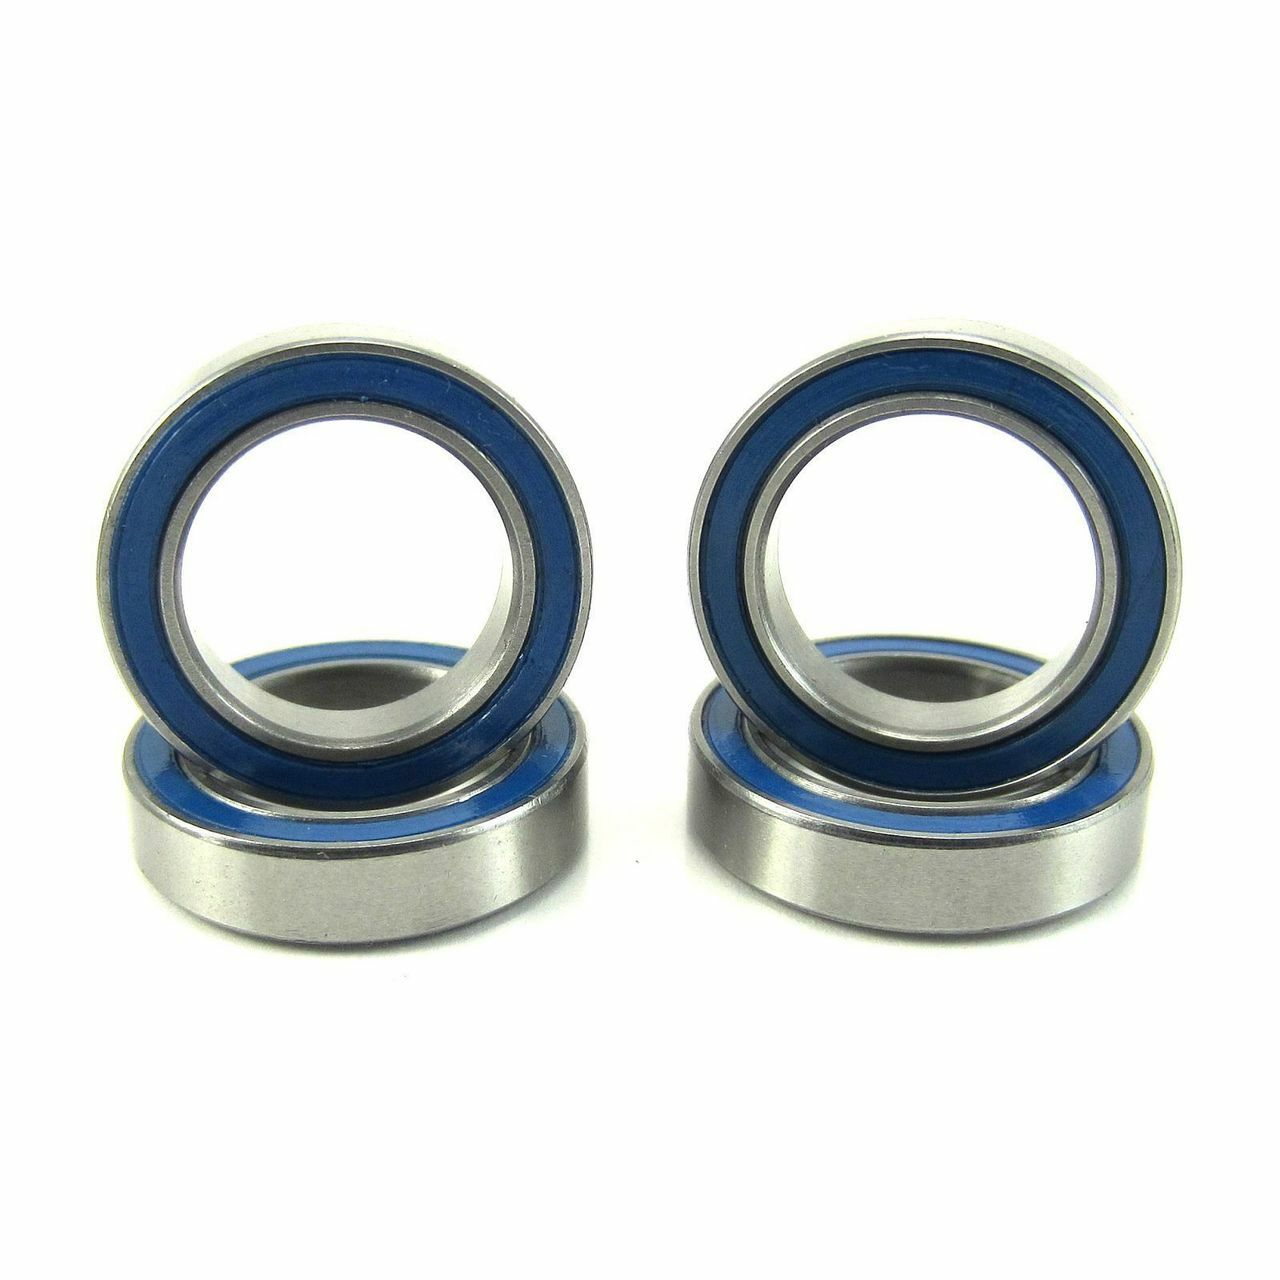 6701-2RS 12x18x4mm Precision High Speed RC Car Ball Bearing, Chrome Steel (GCr15) with Blue Rubber Seals ABEC-1 ABEC-3 ABEC-5